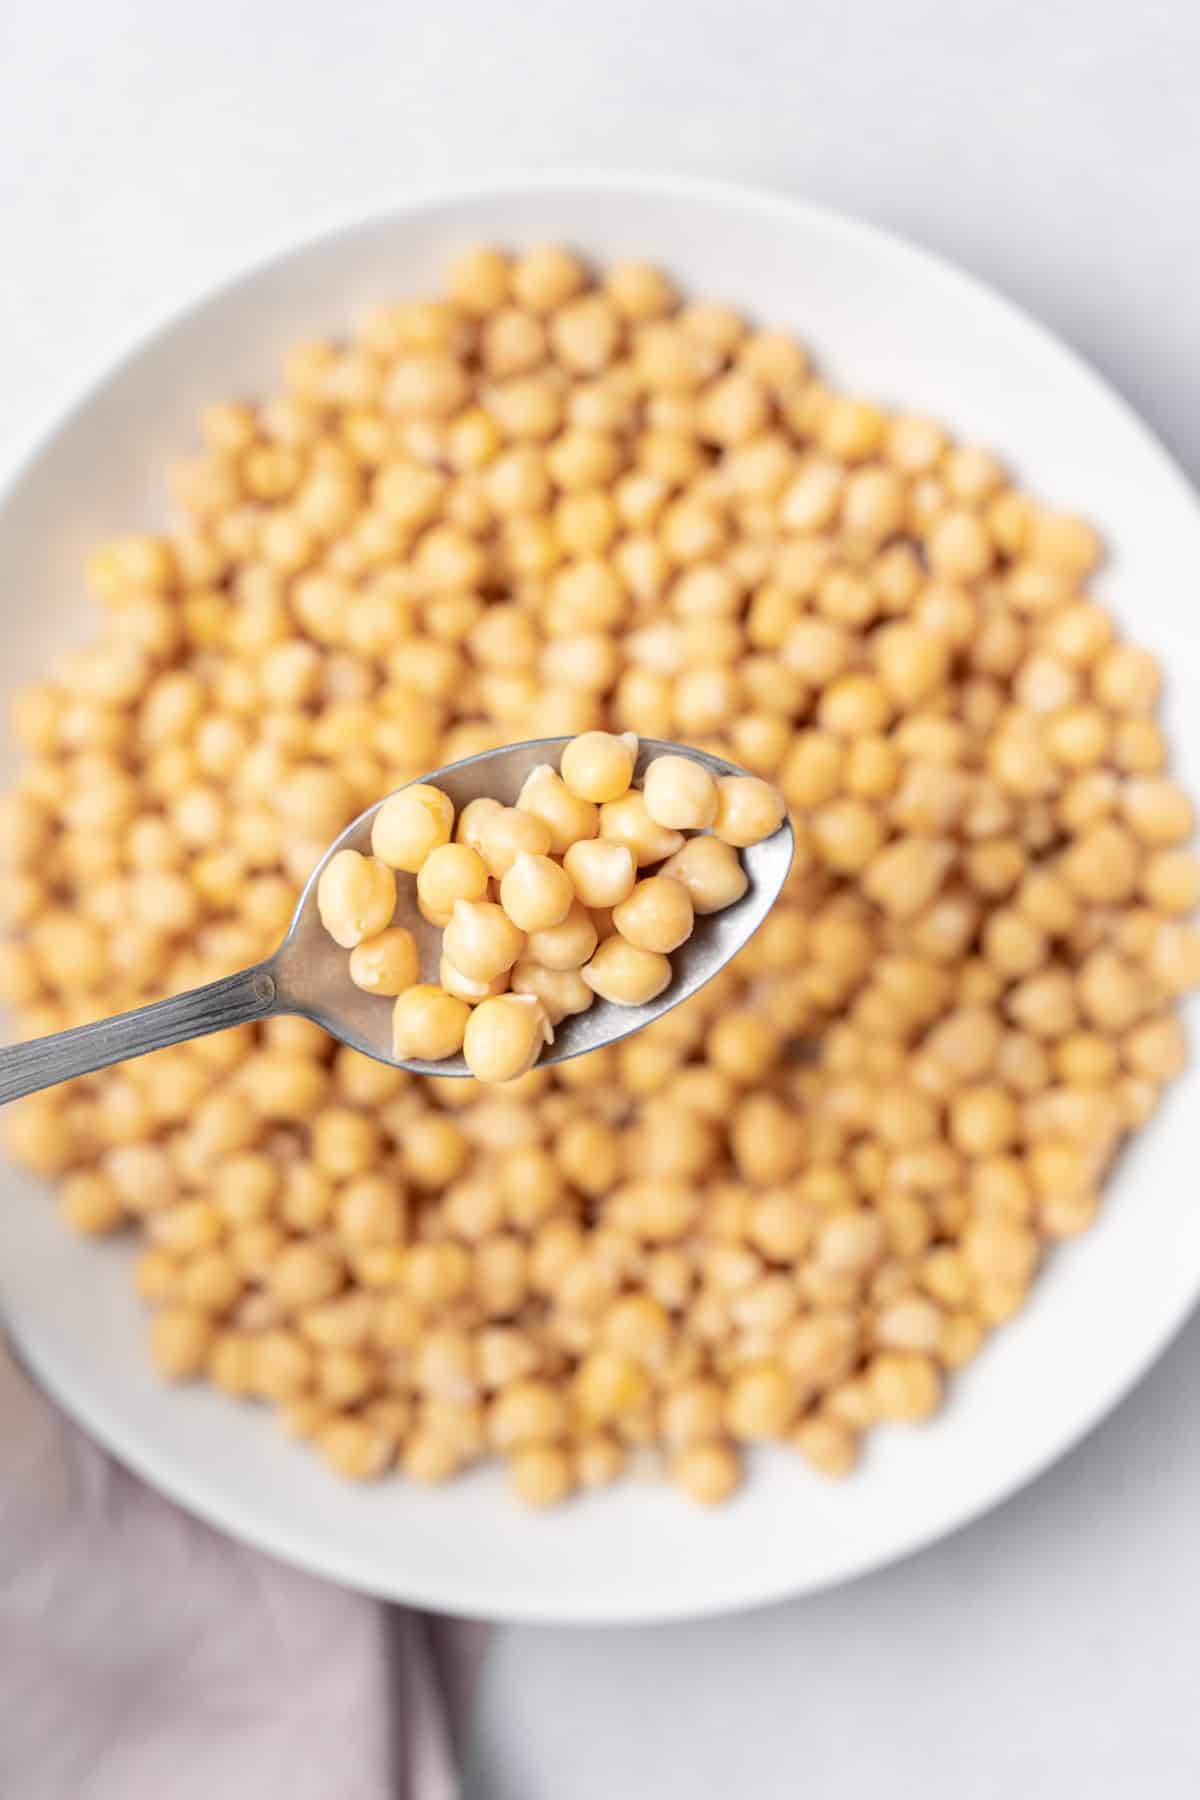 Spoonful of cooked chickpeas over a plate full of chickpeas.